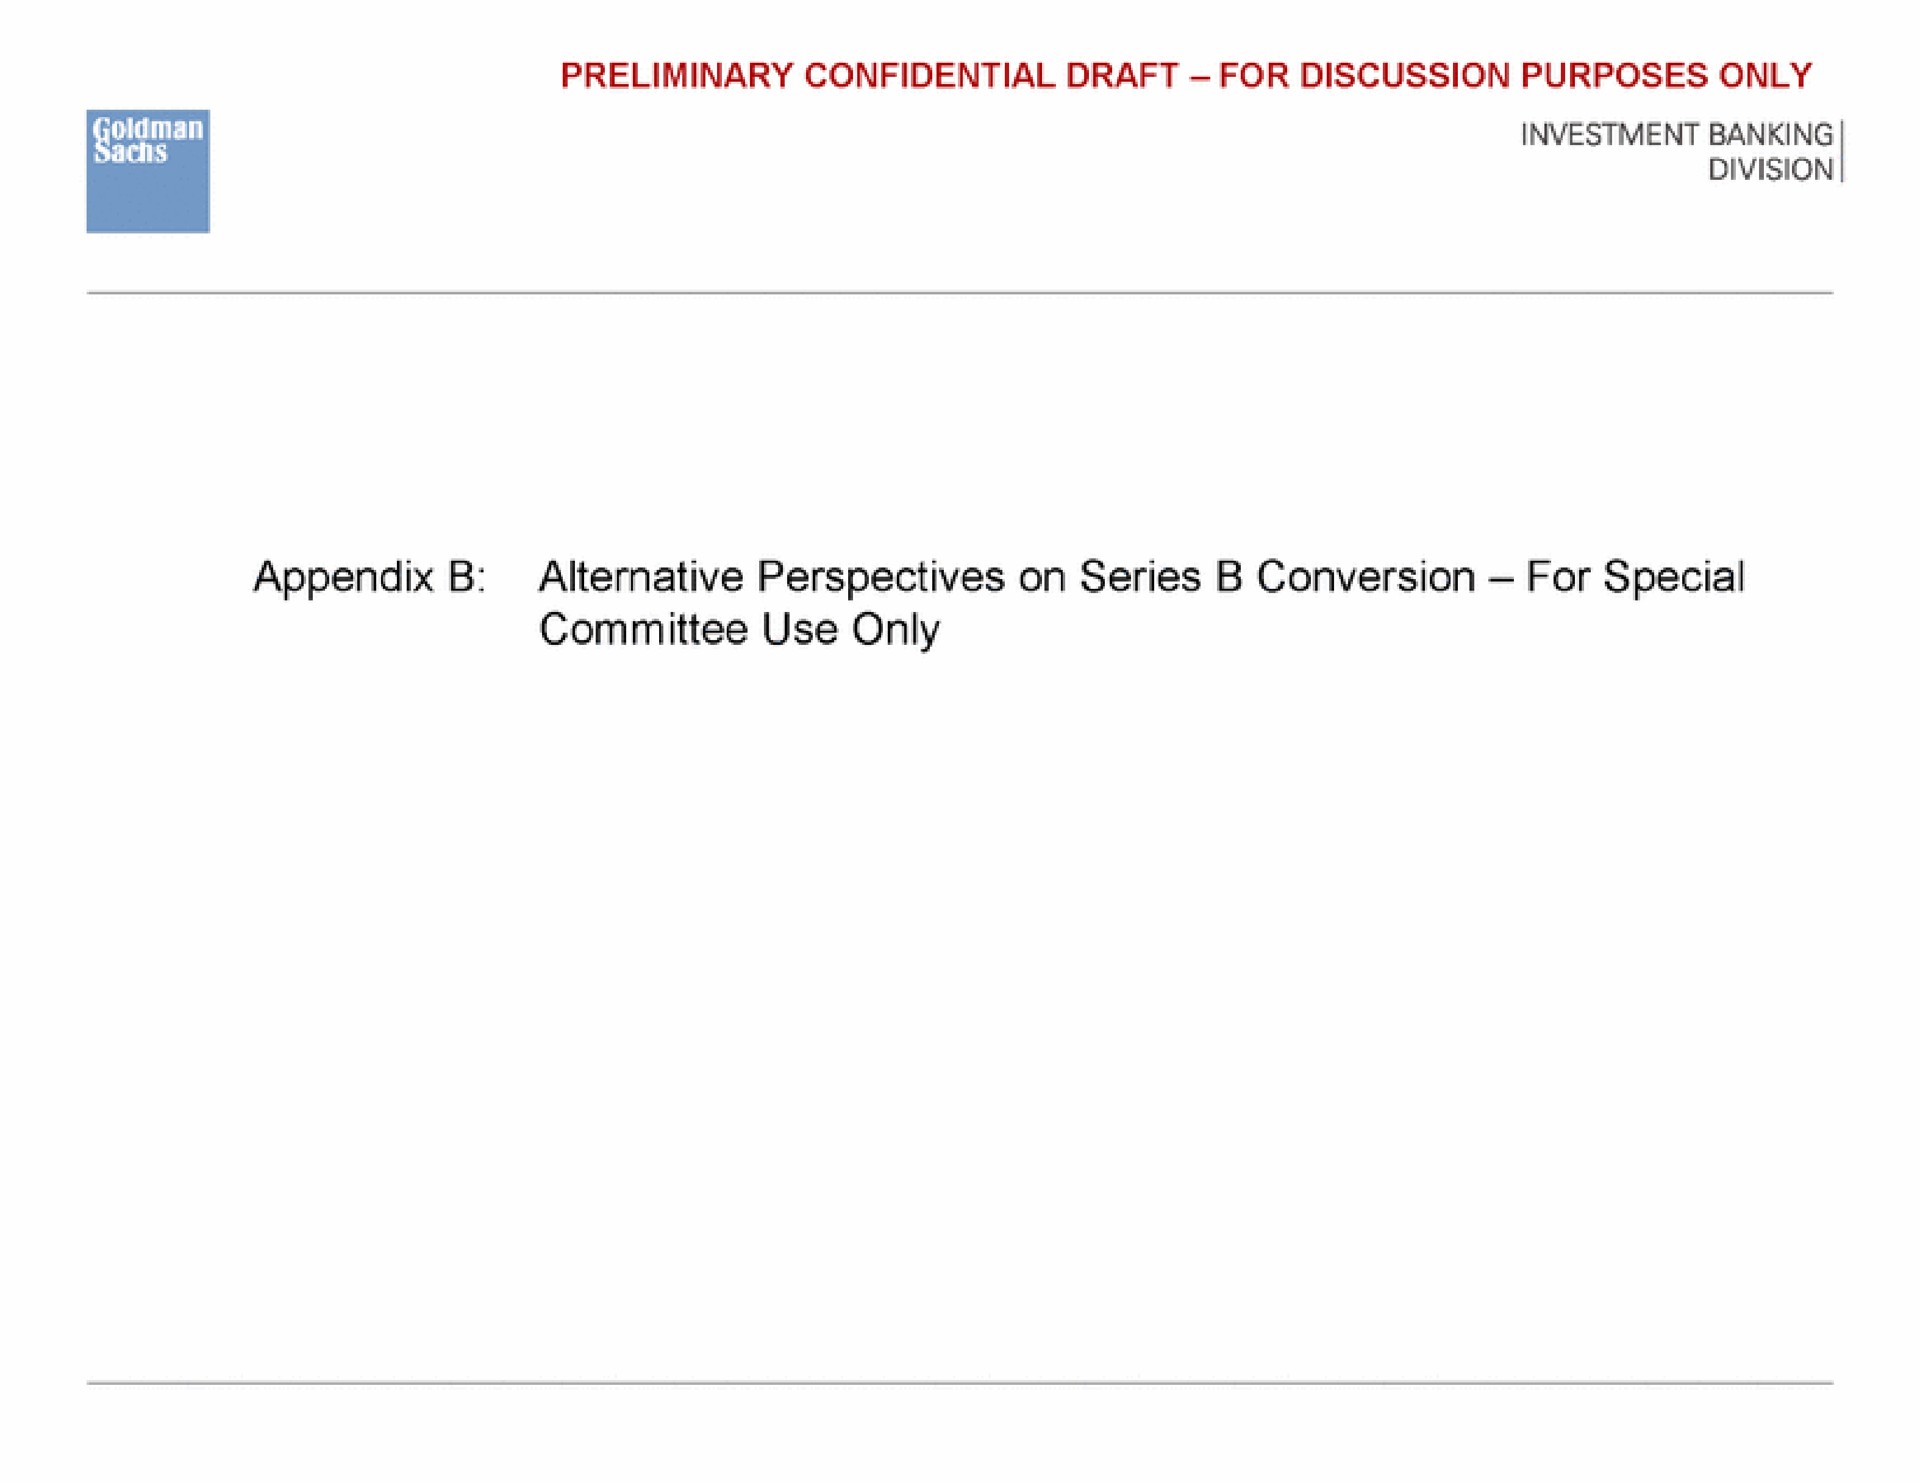 appendix alternative perspectives on series conversion for special committee use only | Goldman Sachs